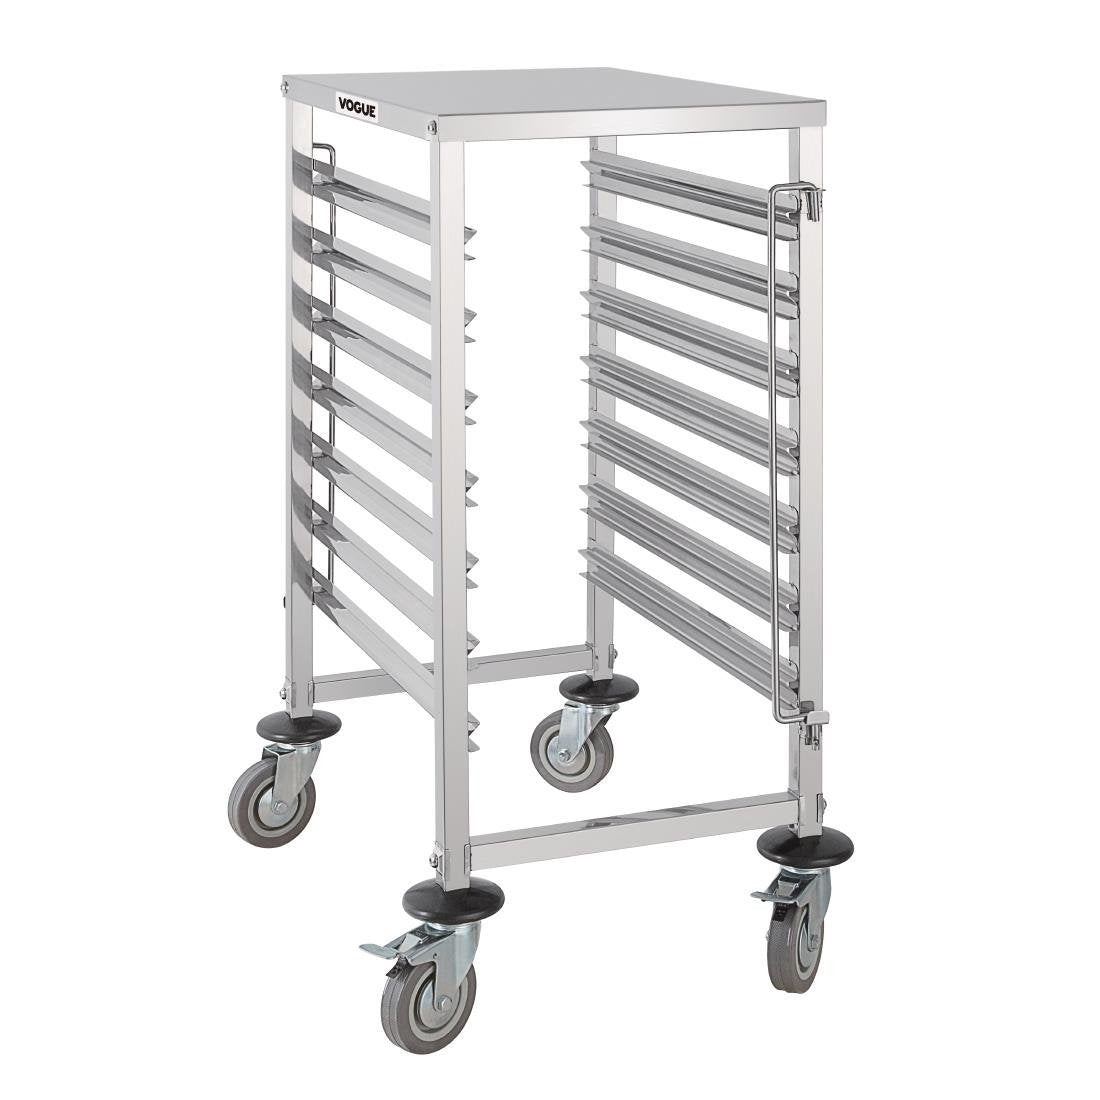 Vogue Gastronorm Racking Trolley 7 Level GG498 Racking Trolleys